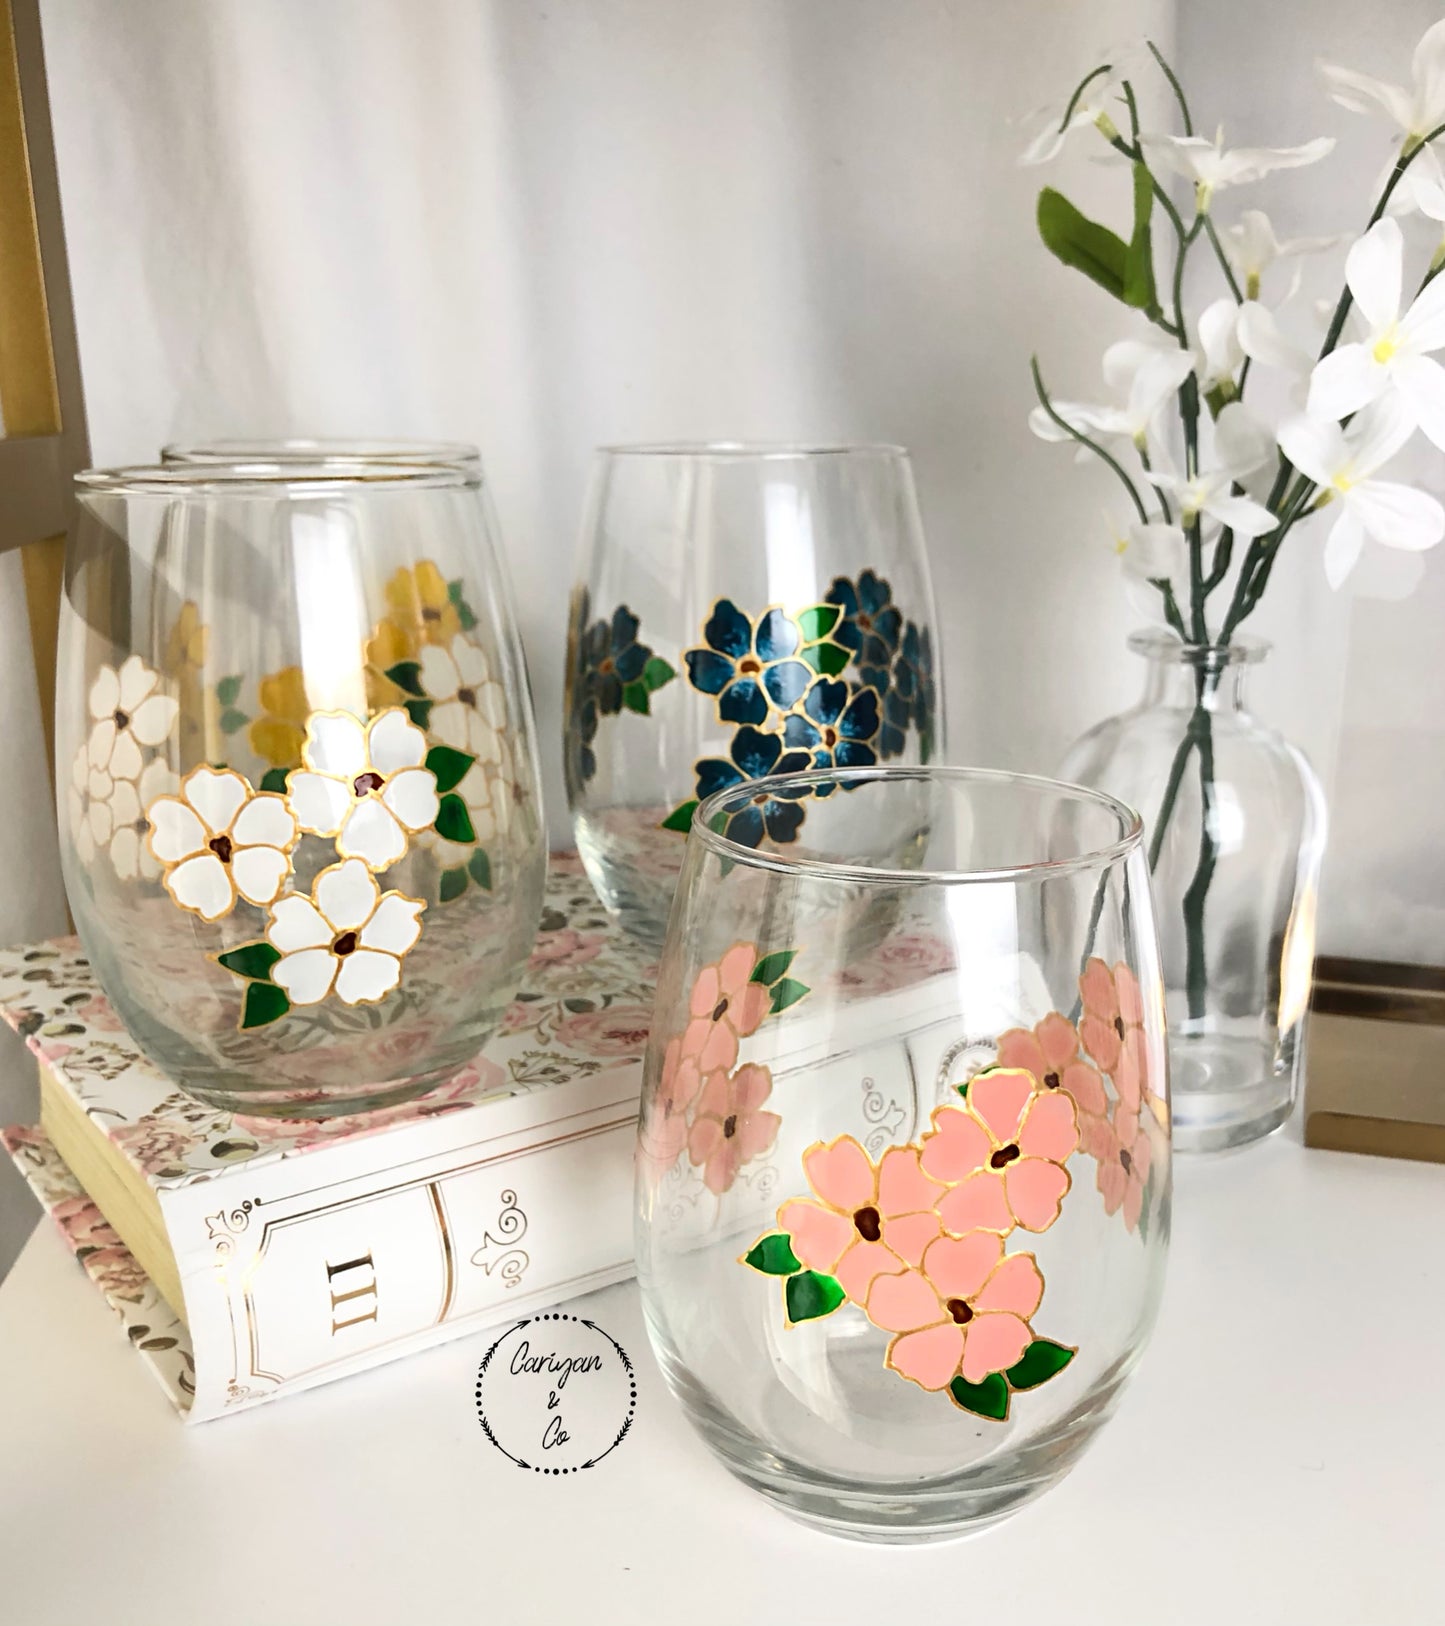 Floral Flower Wine Glasses | Chic Spring Summer Stemless Wine Glass | Housewarming Gift | Hand painted Water Glasses